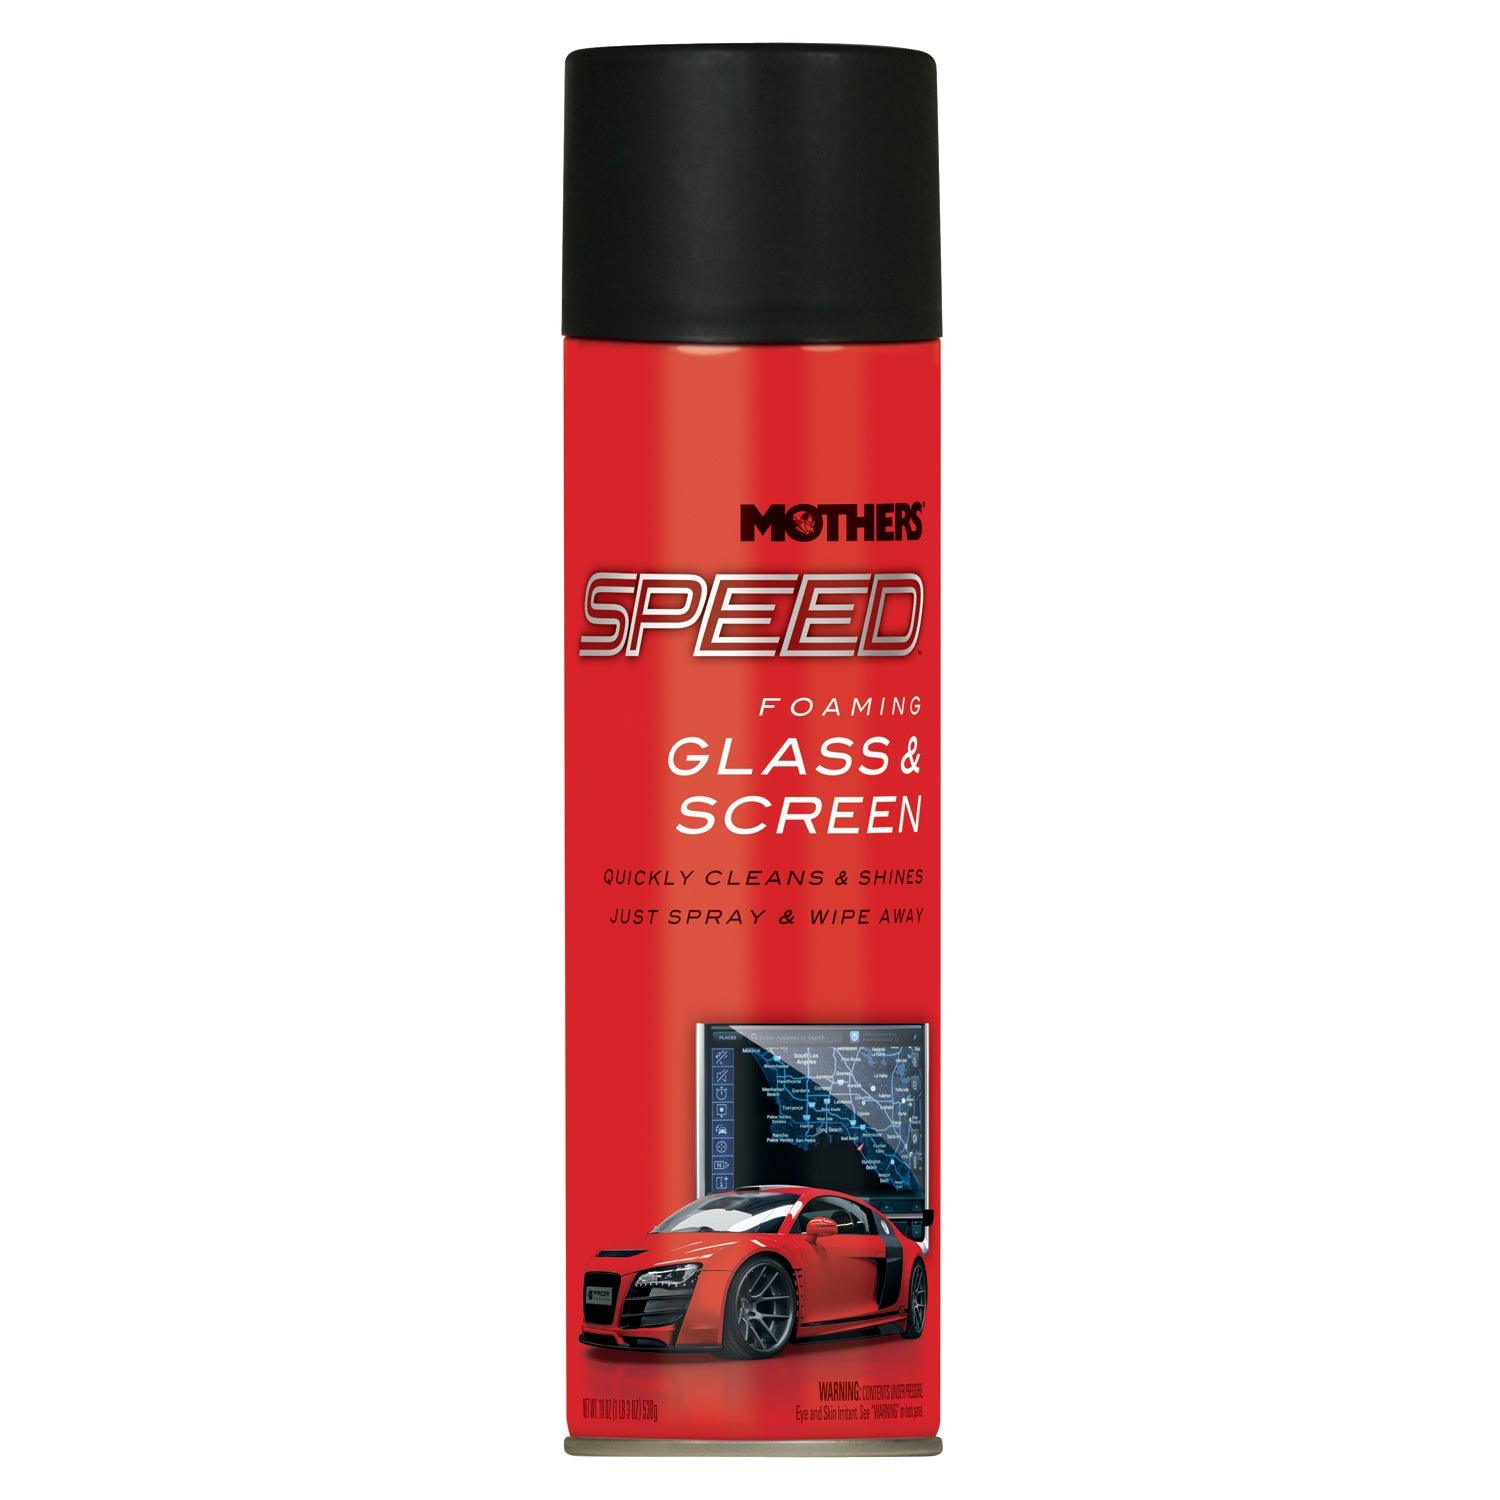 Speed Foaming Glass Cleaner 19oz. Can - Burlile Performance Products